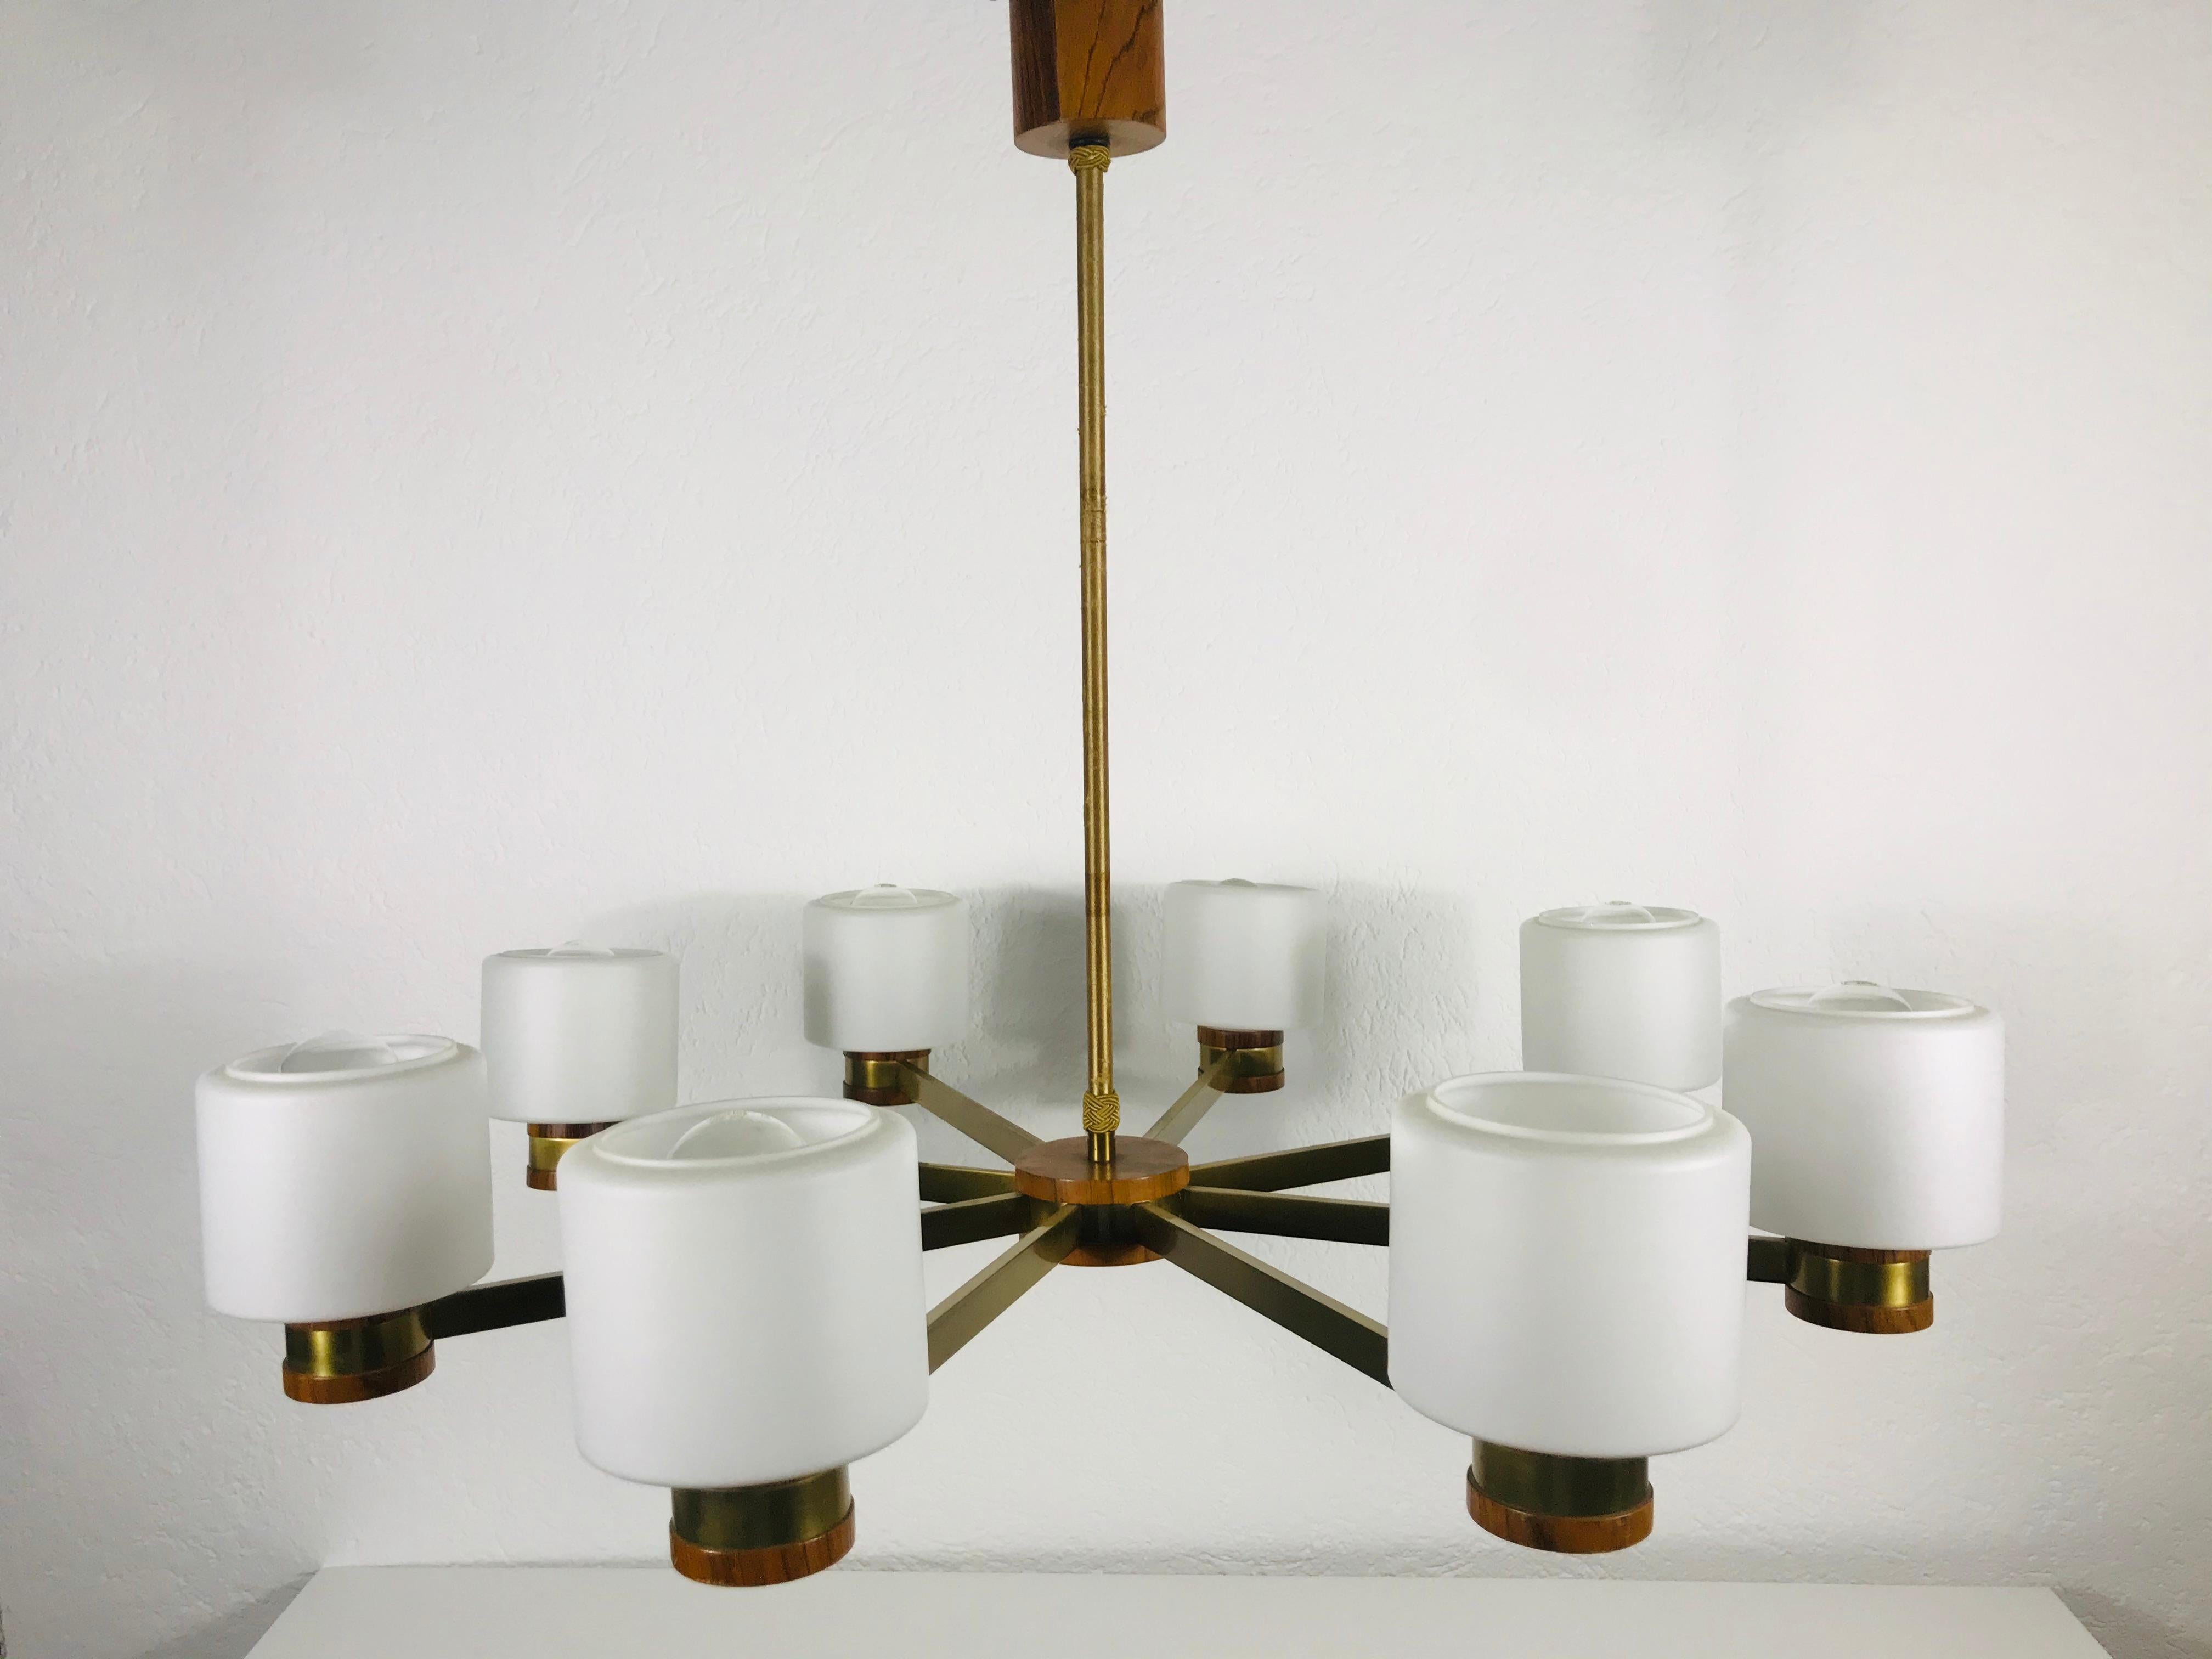 European Midcentury Brass and Opaline Glass Chandelier by Kaiser, Germany, 1960s